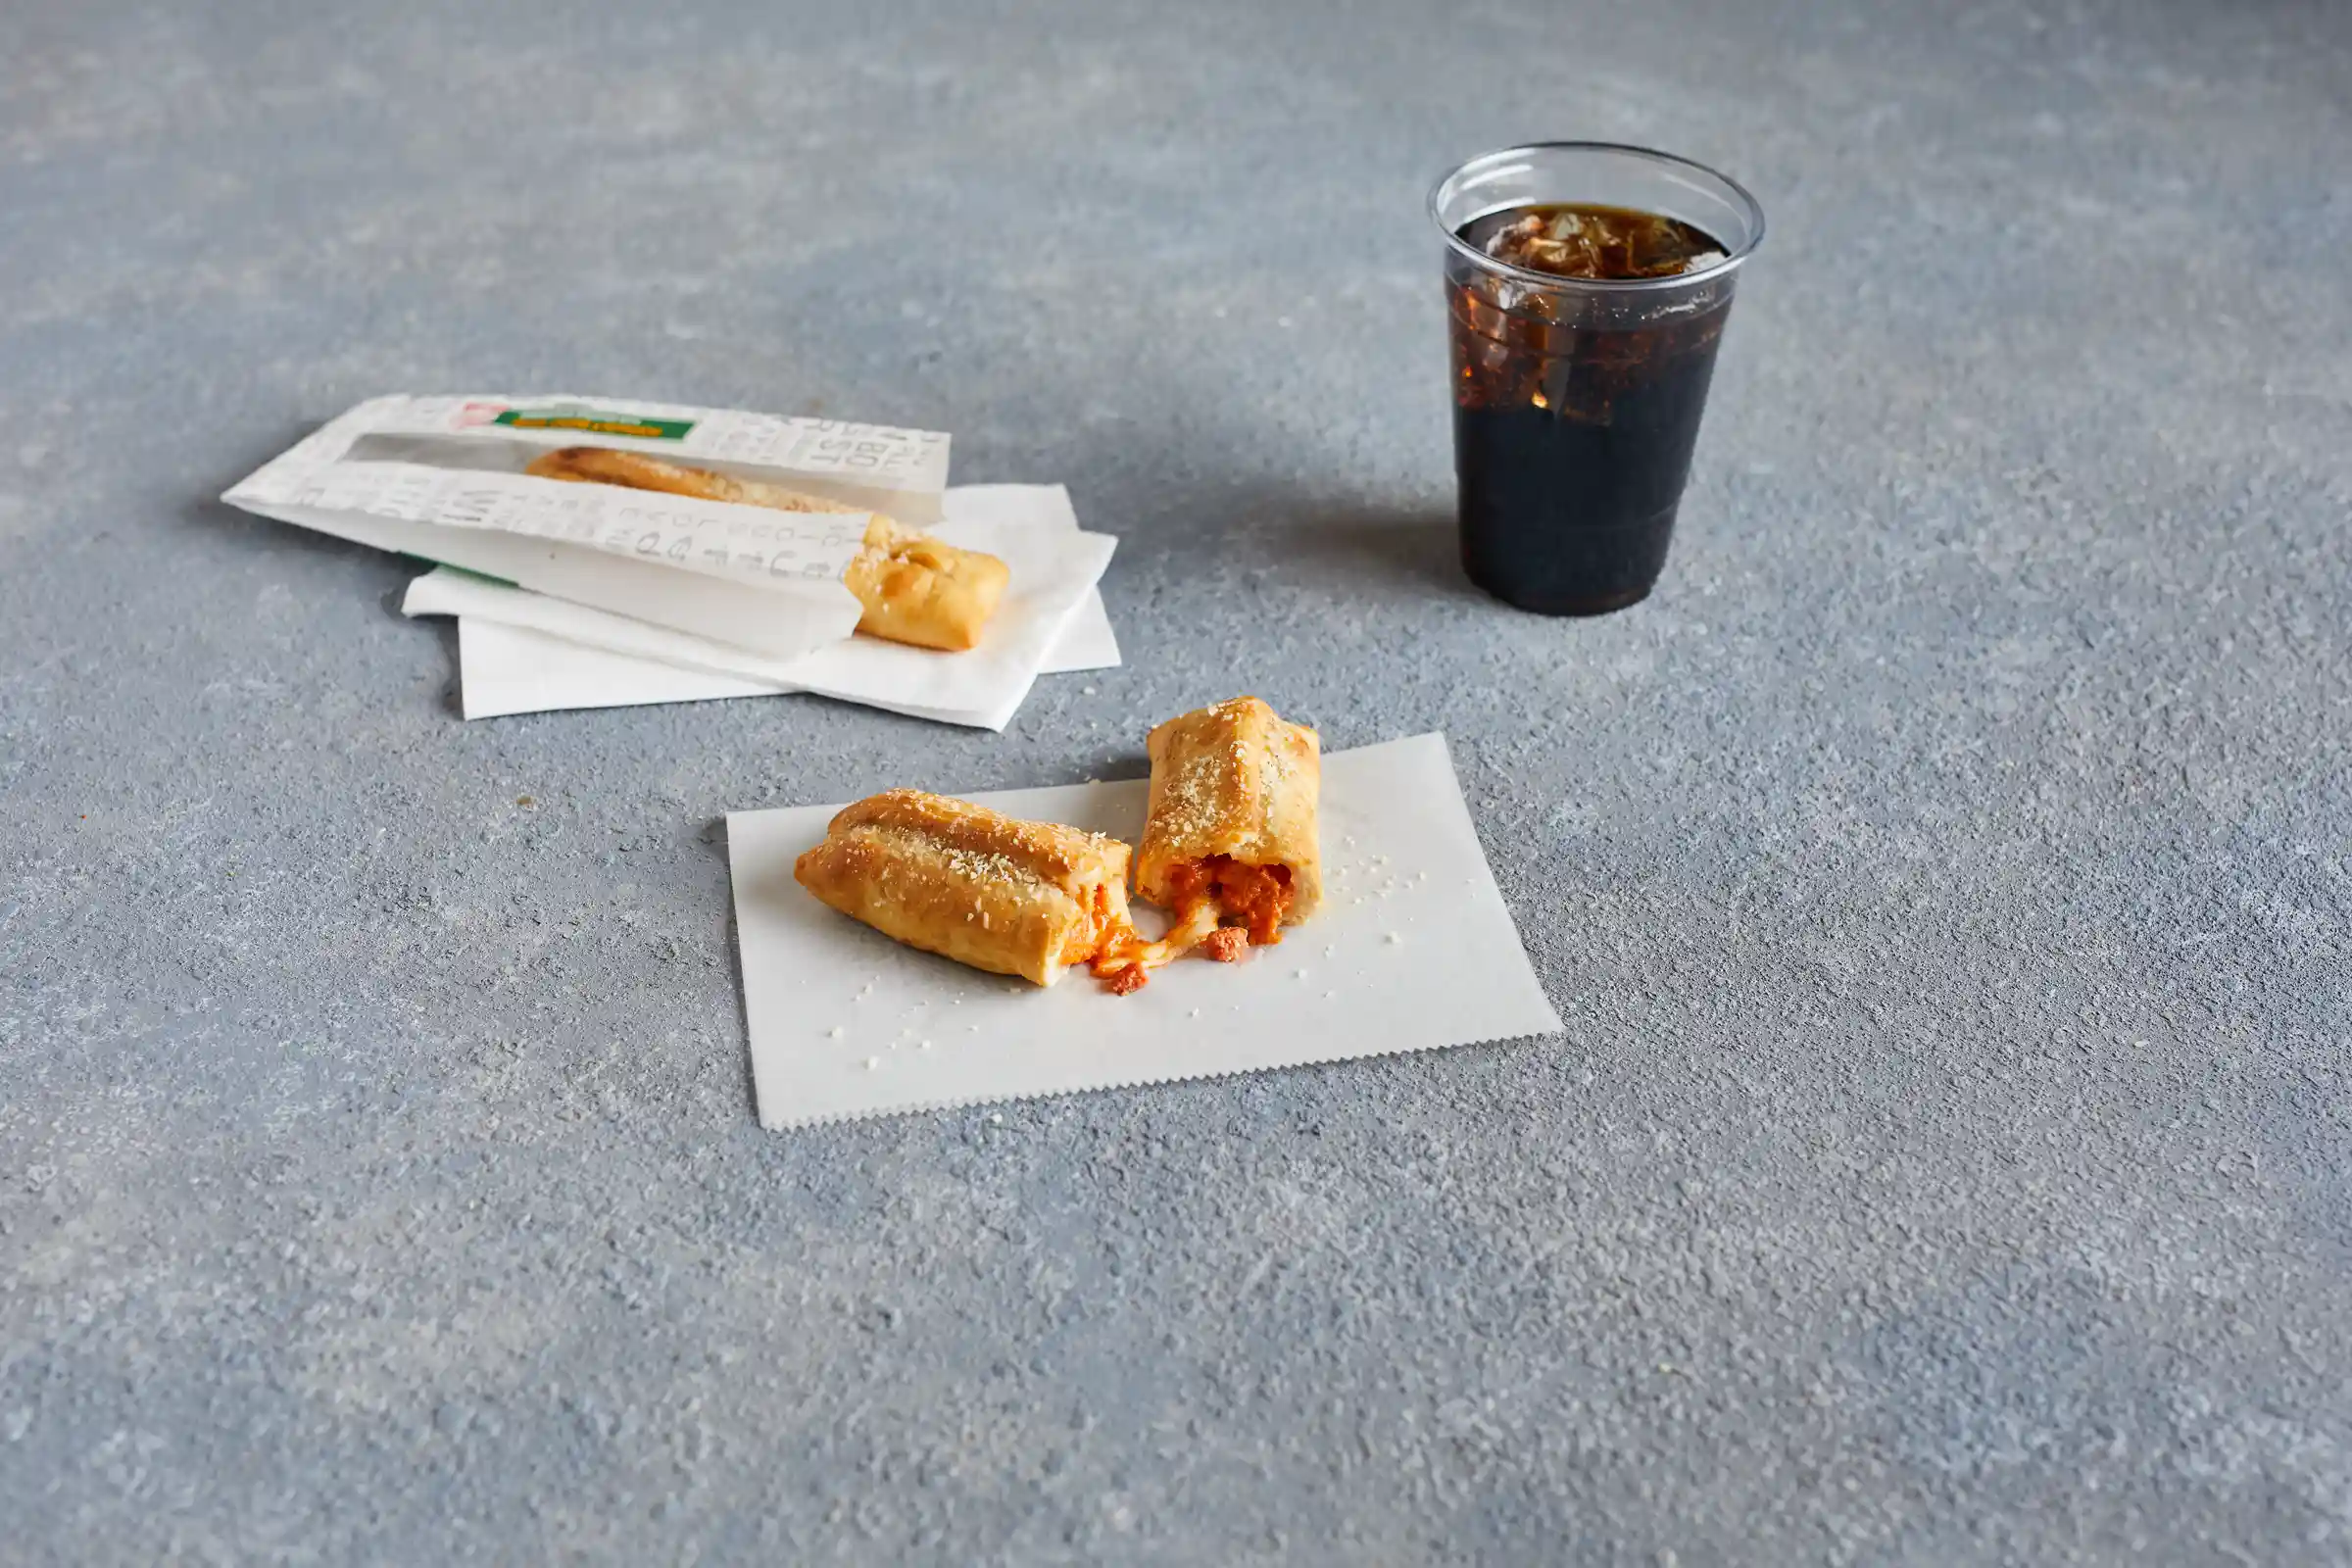 Bosco® Breadstick Stuffed with Sauce, Cheese, and Pepperonihttps://images.salsify.com/image/upload/s--F0A-iH8P--/q_25/unjrnbz219hdusab7opz.webp